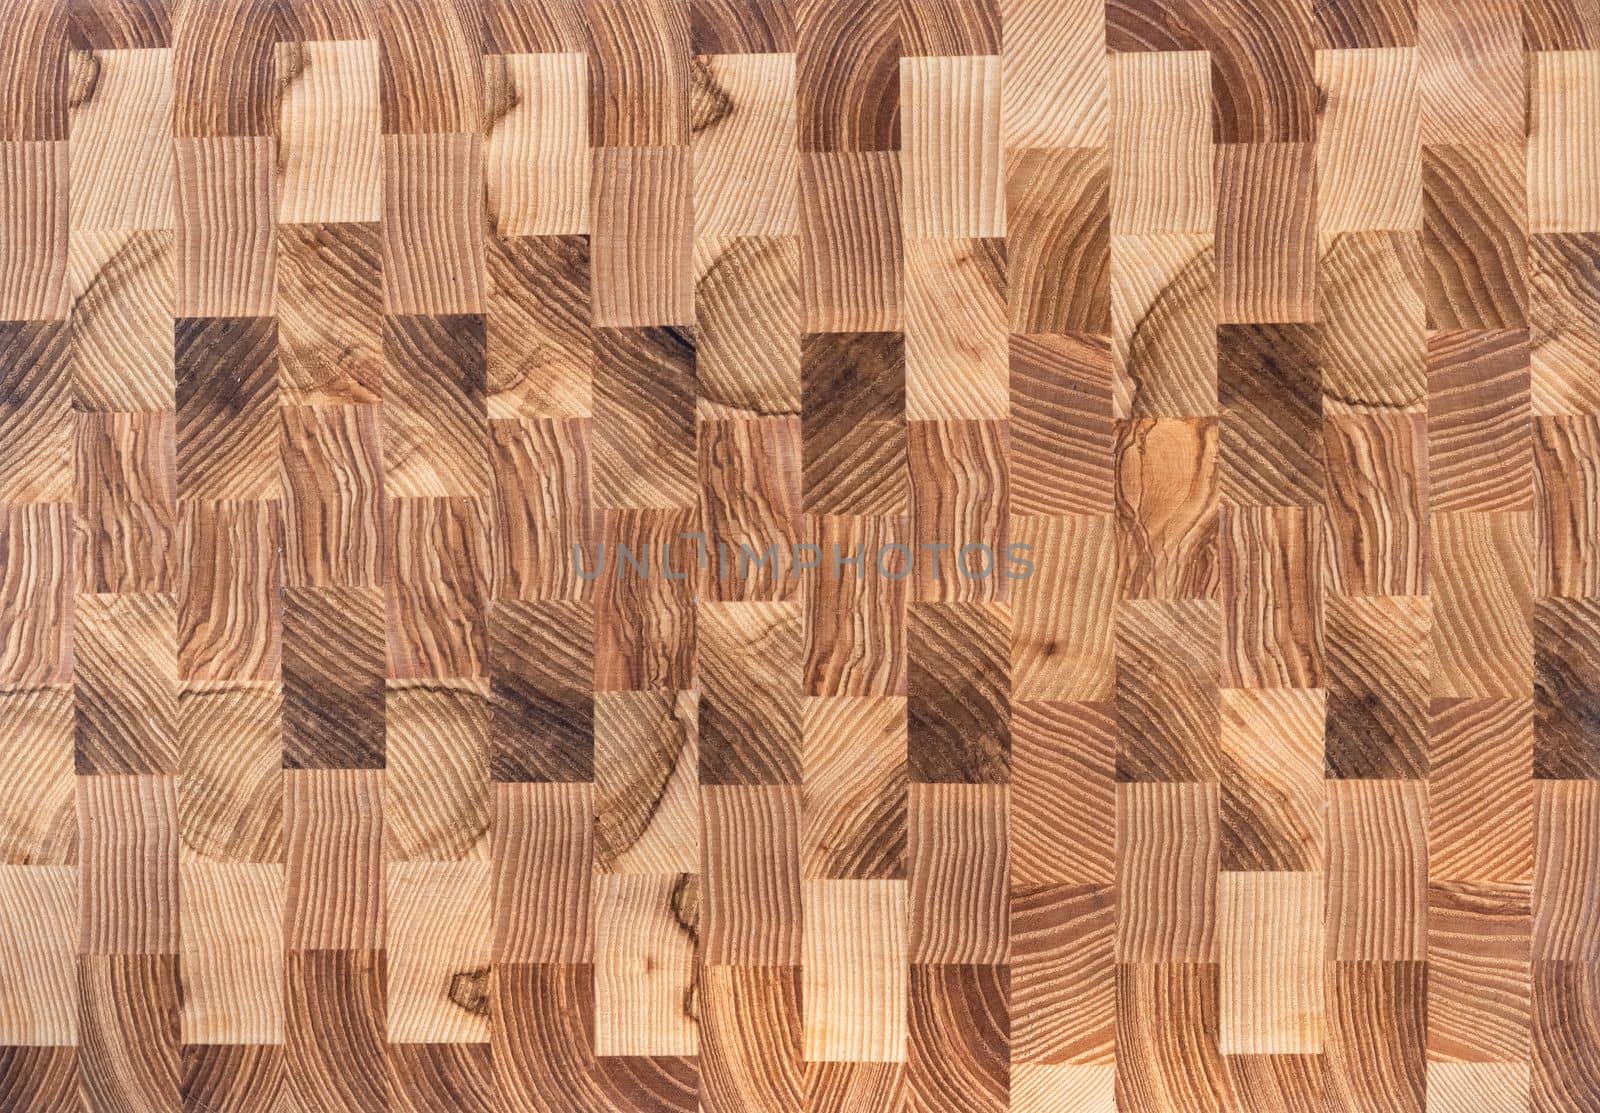 structure of wood composed of several layers. Natural wall background by Edophoto